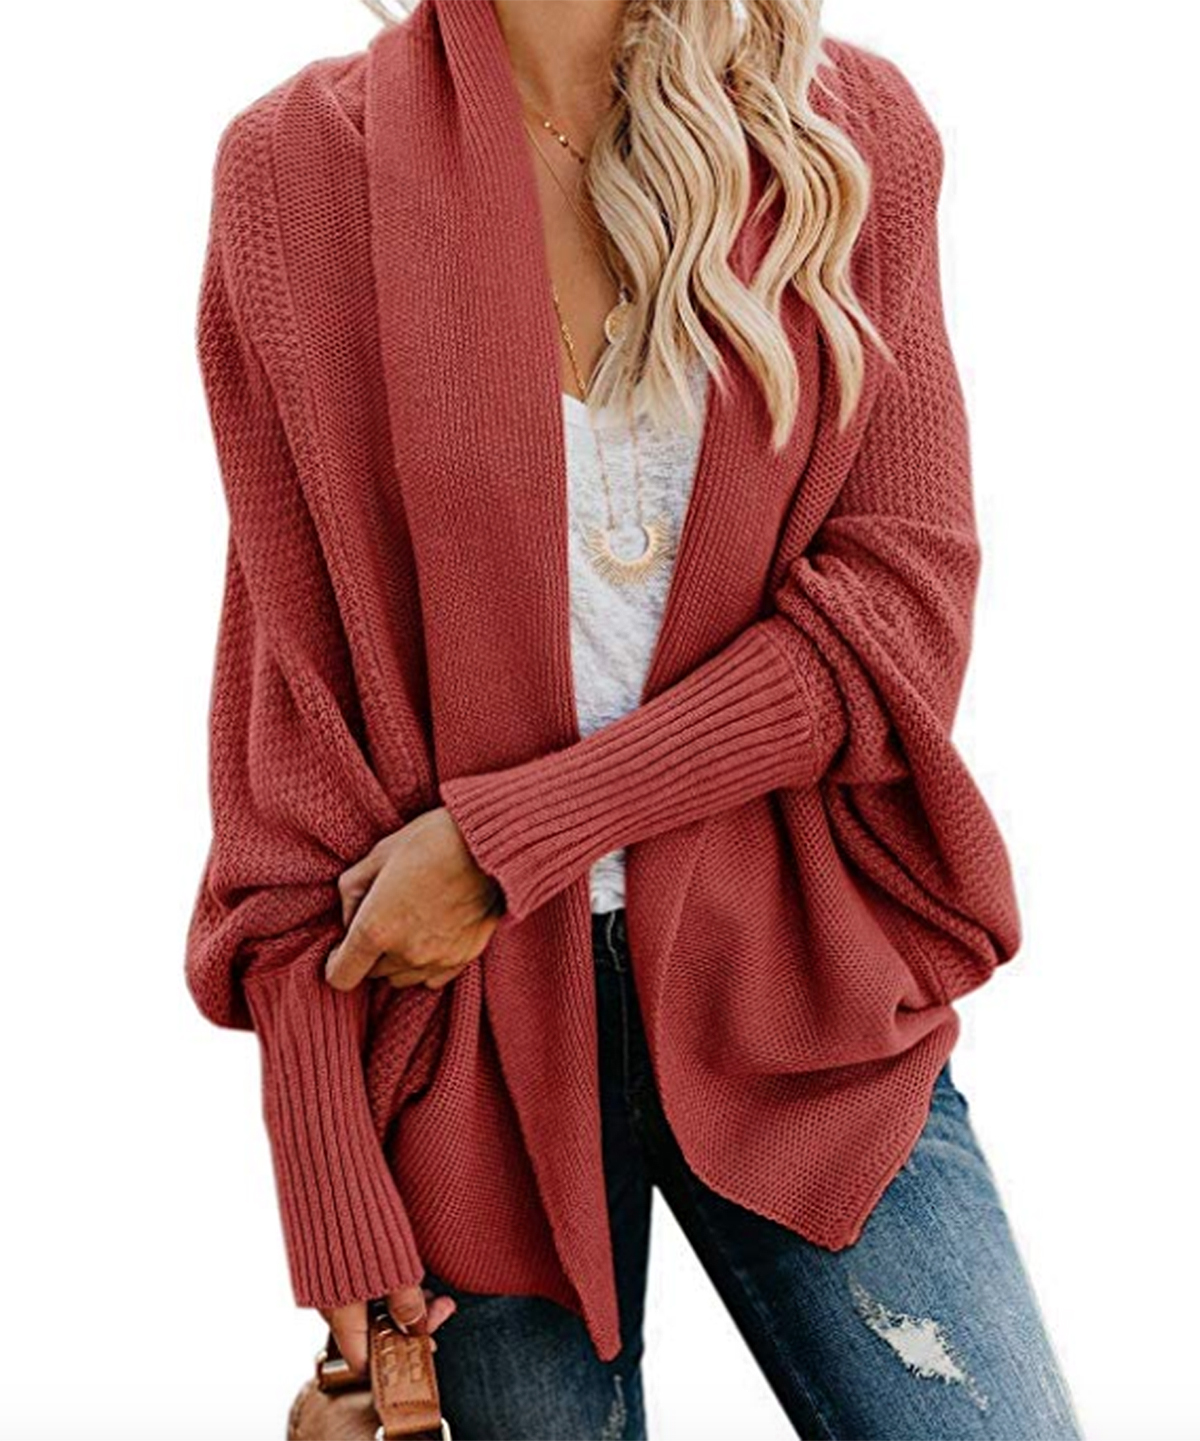 This Amazon Slouchy Sweater Is a Total Fall Closet Staple